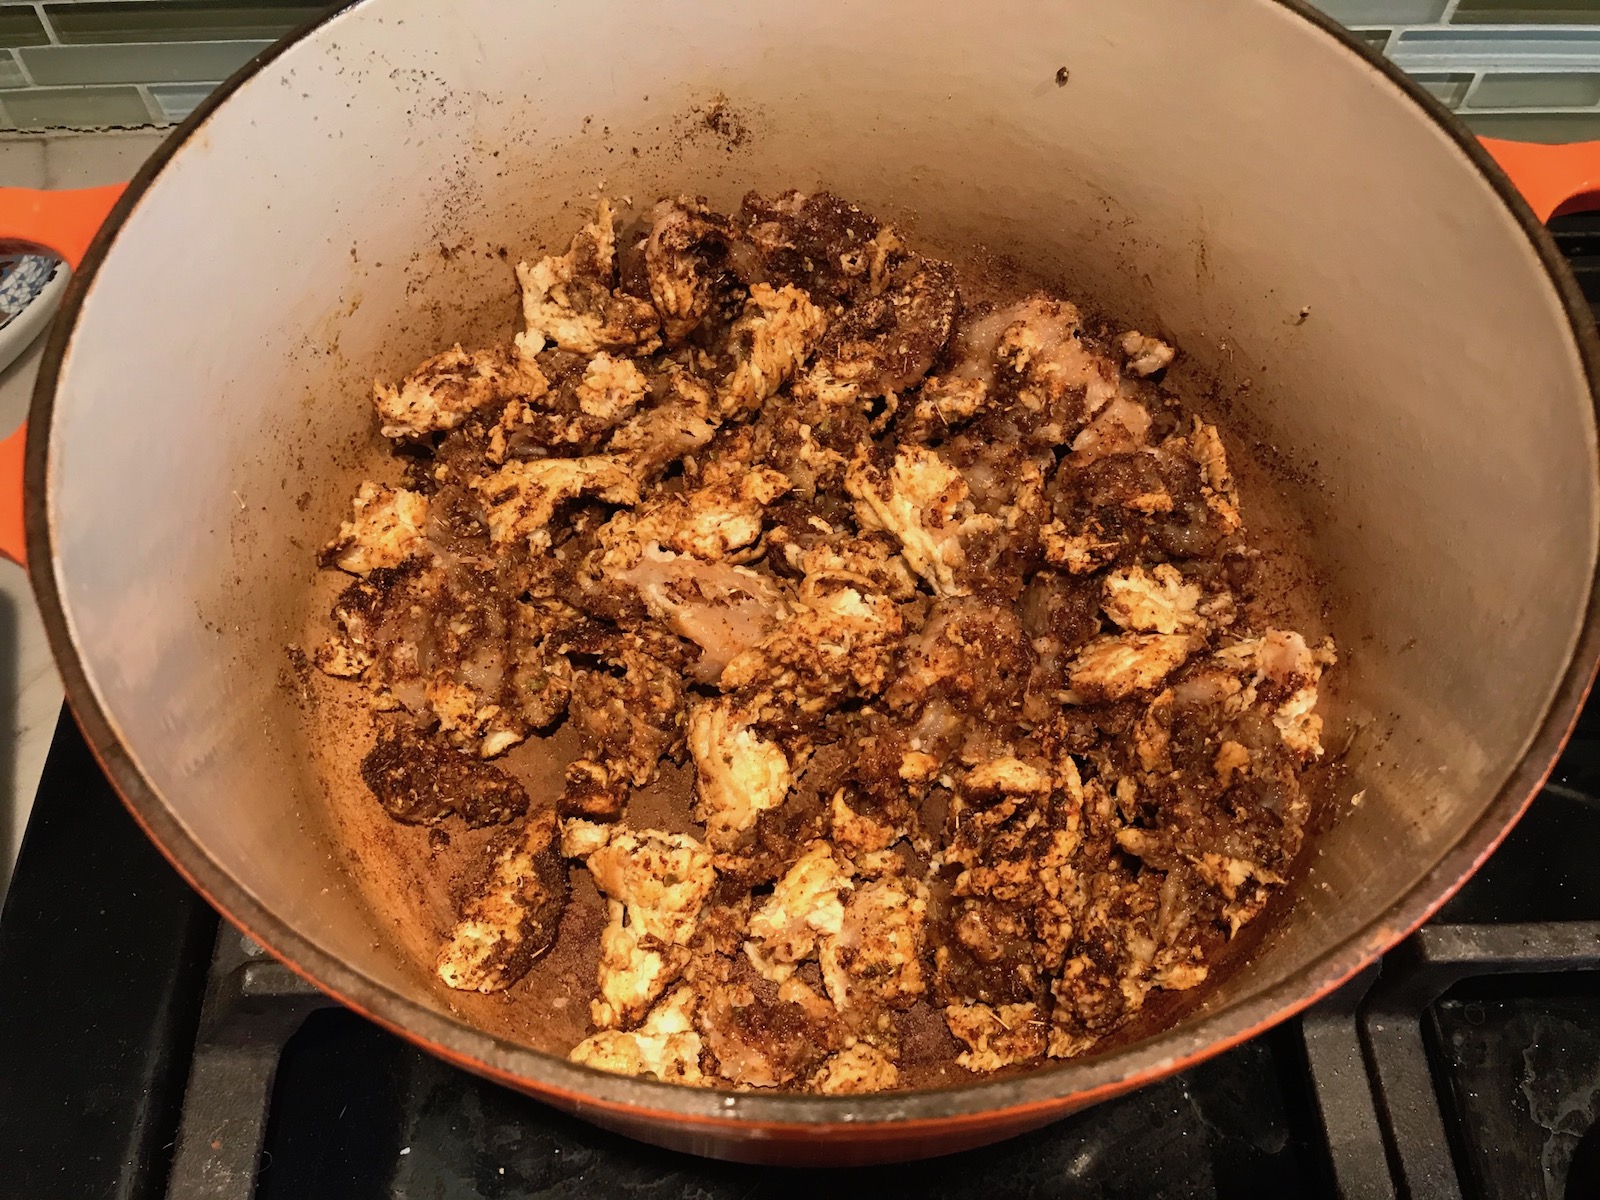 Seasoned ground chicken cooking in pot for Tex Mex Unstuffed Peppers with Ground Chicken.  Juicy Sweet Bell Peppers are chopped up and cooked with the Tex Mex style ground chicken, tomatoes, Mexican seasonings, cheese, rice and corn tortillas.